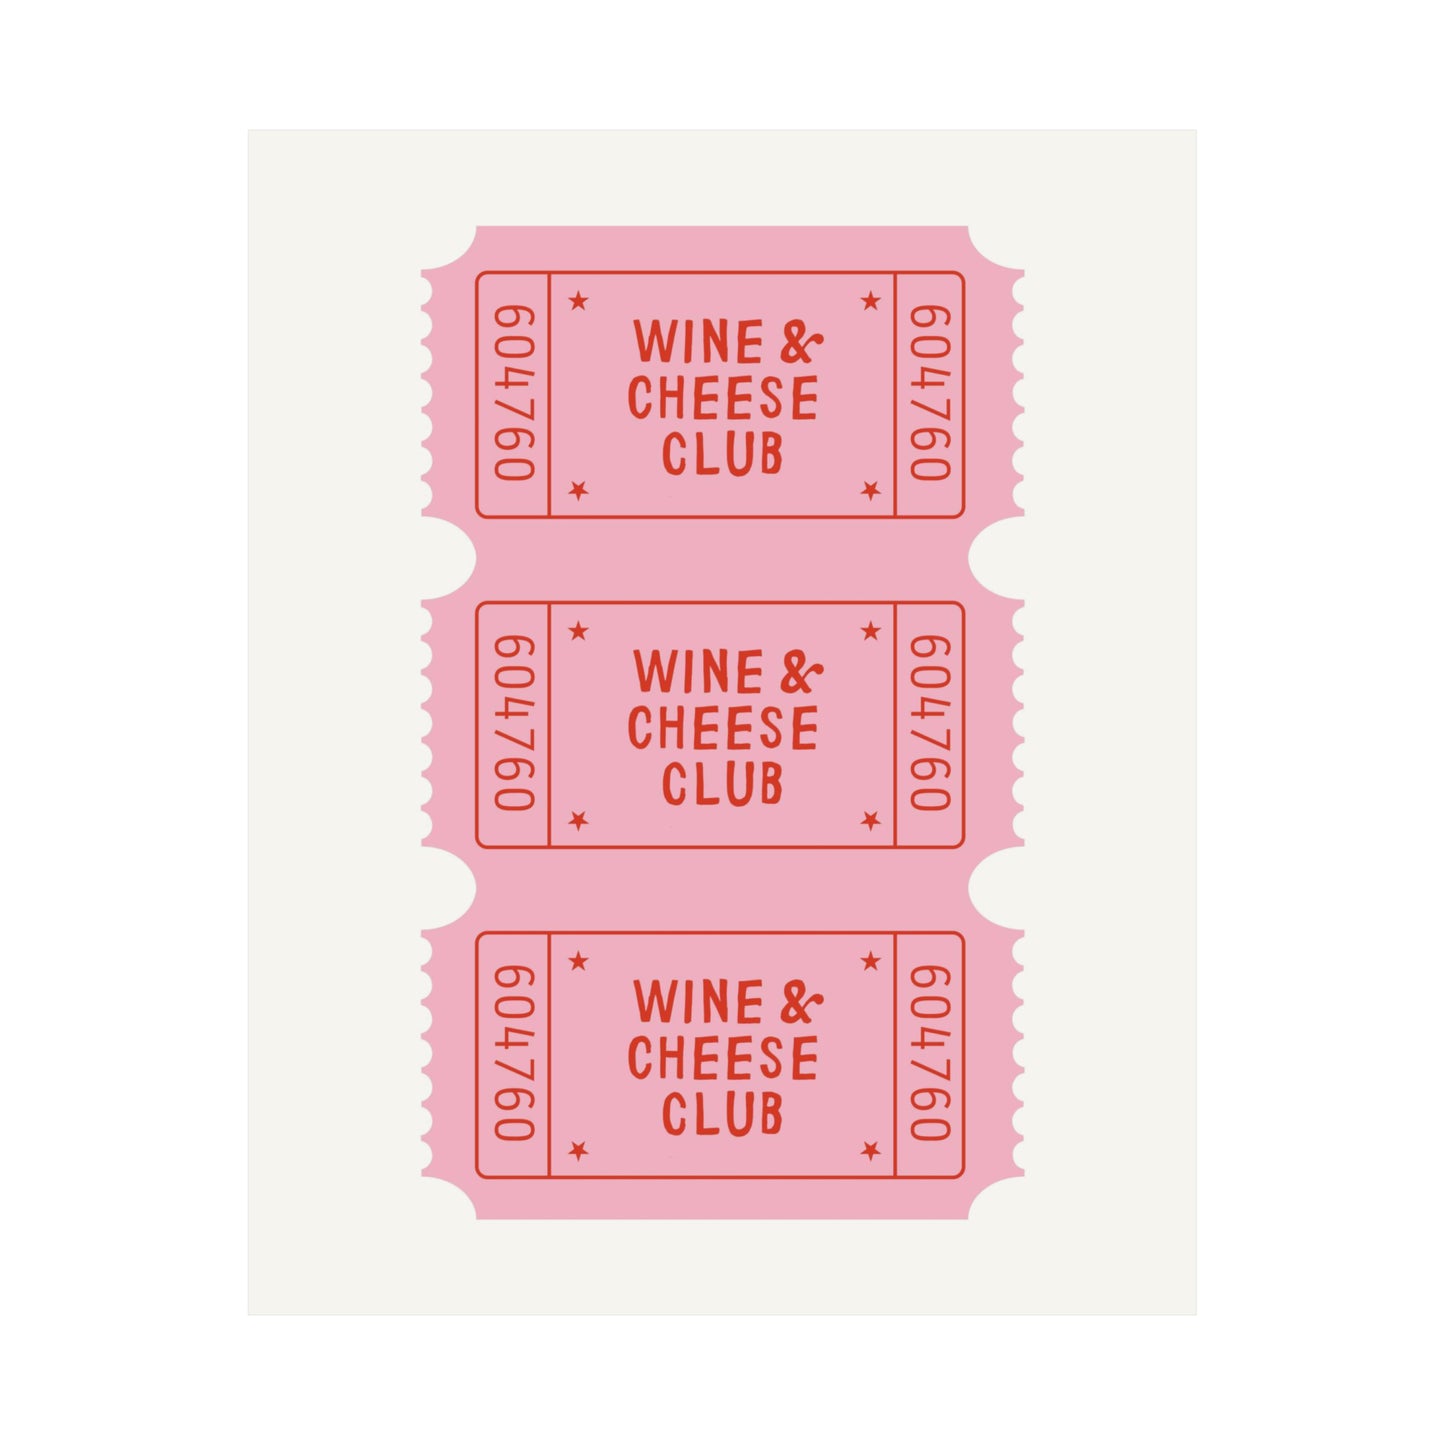 Wine & Cheese Club Ticket Poster